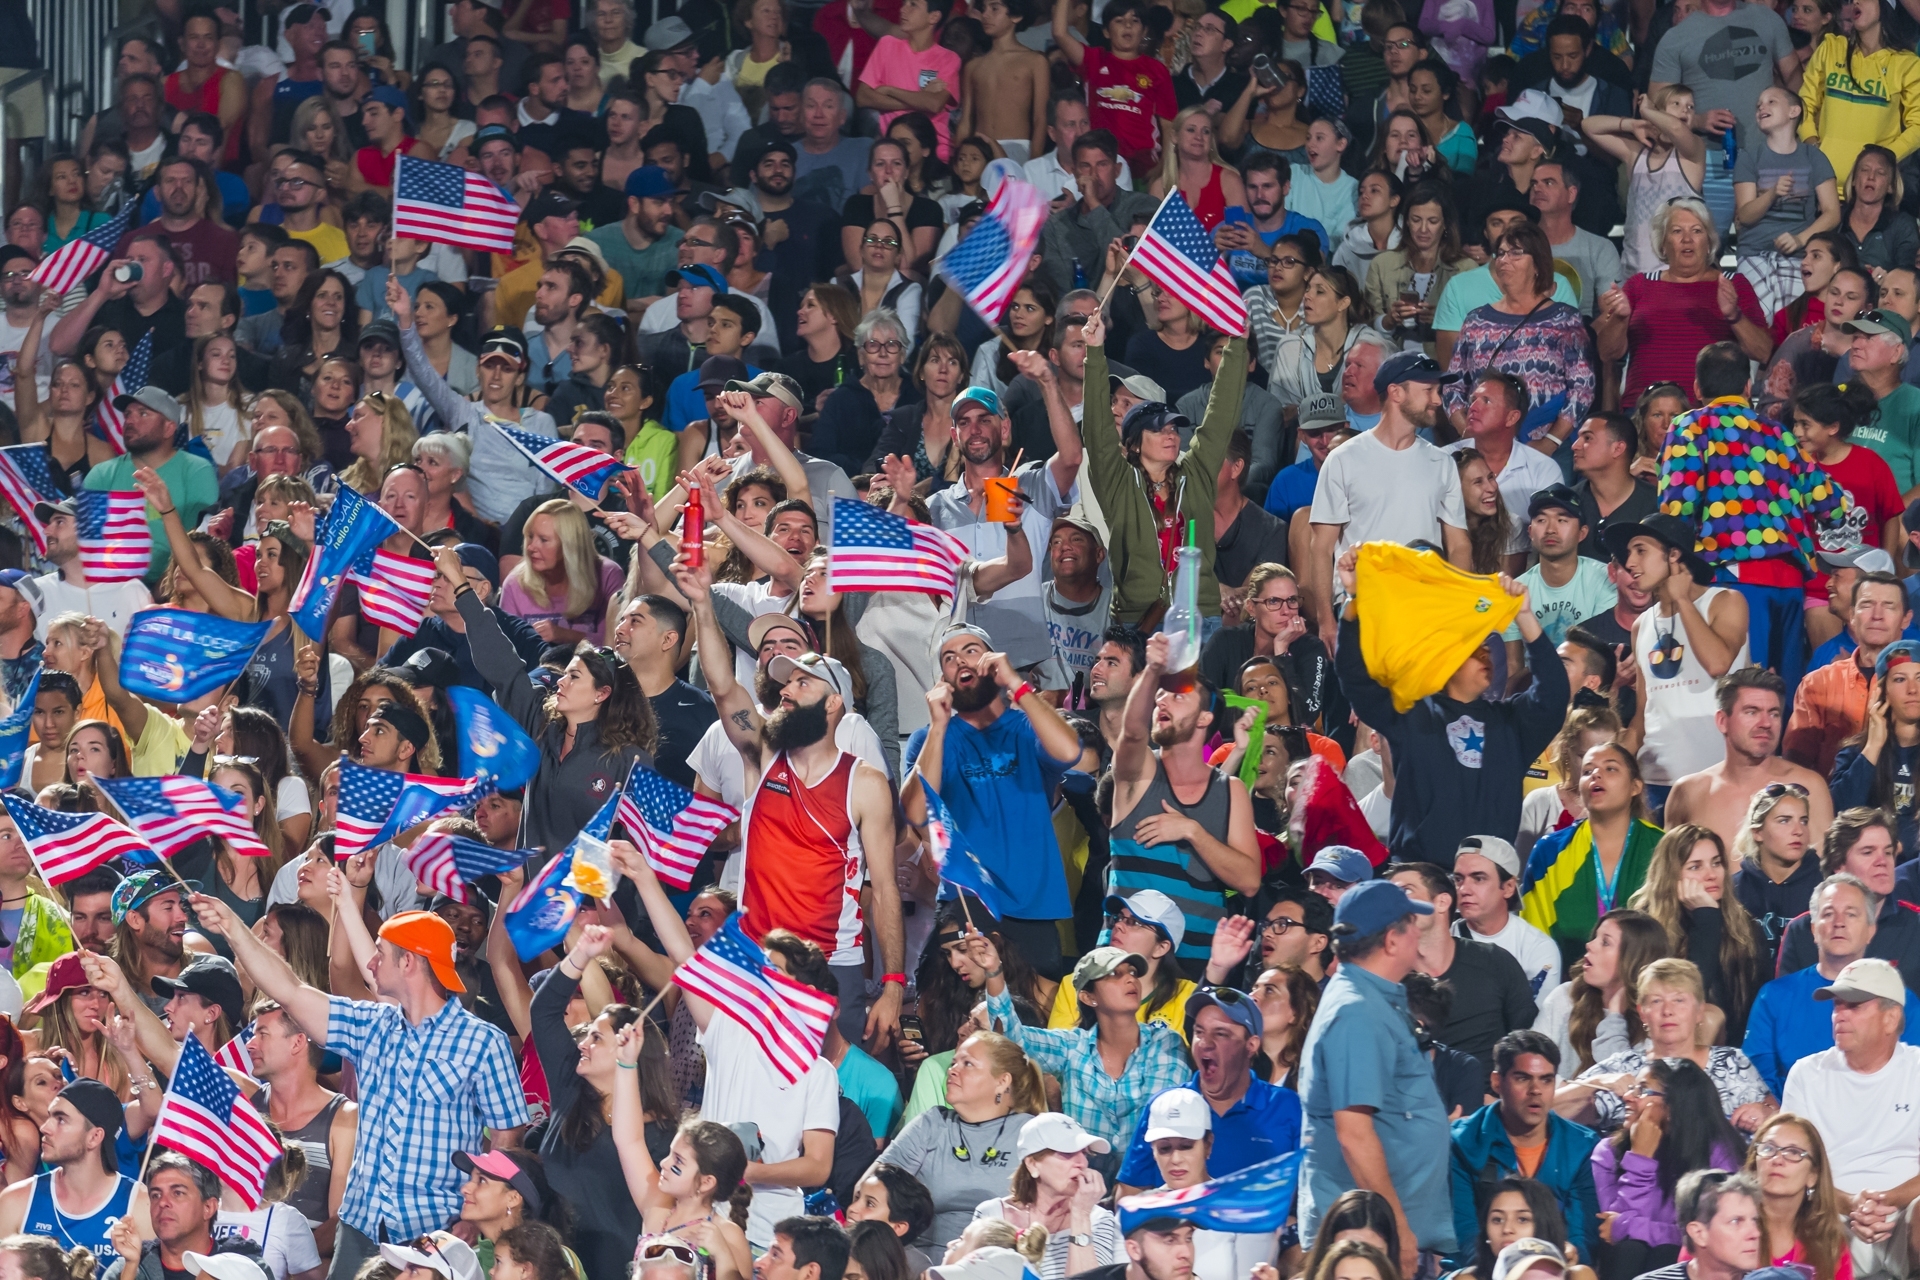 The US fans were in great voice throughout the tournament. Photocredit: Martin Steinthaler.